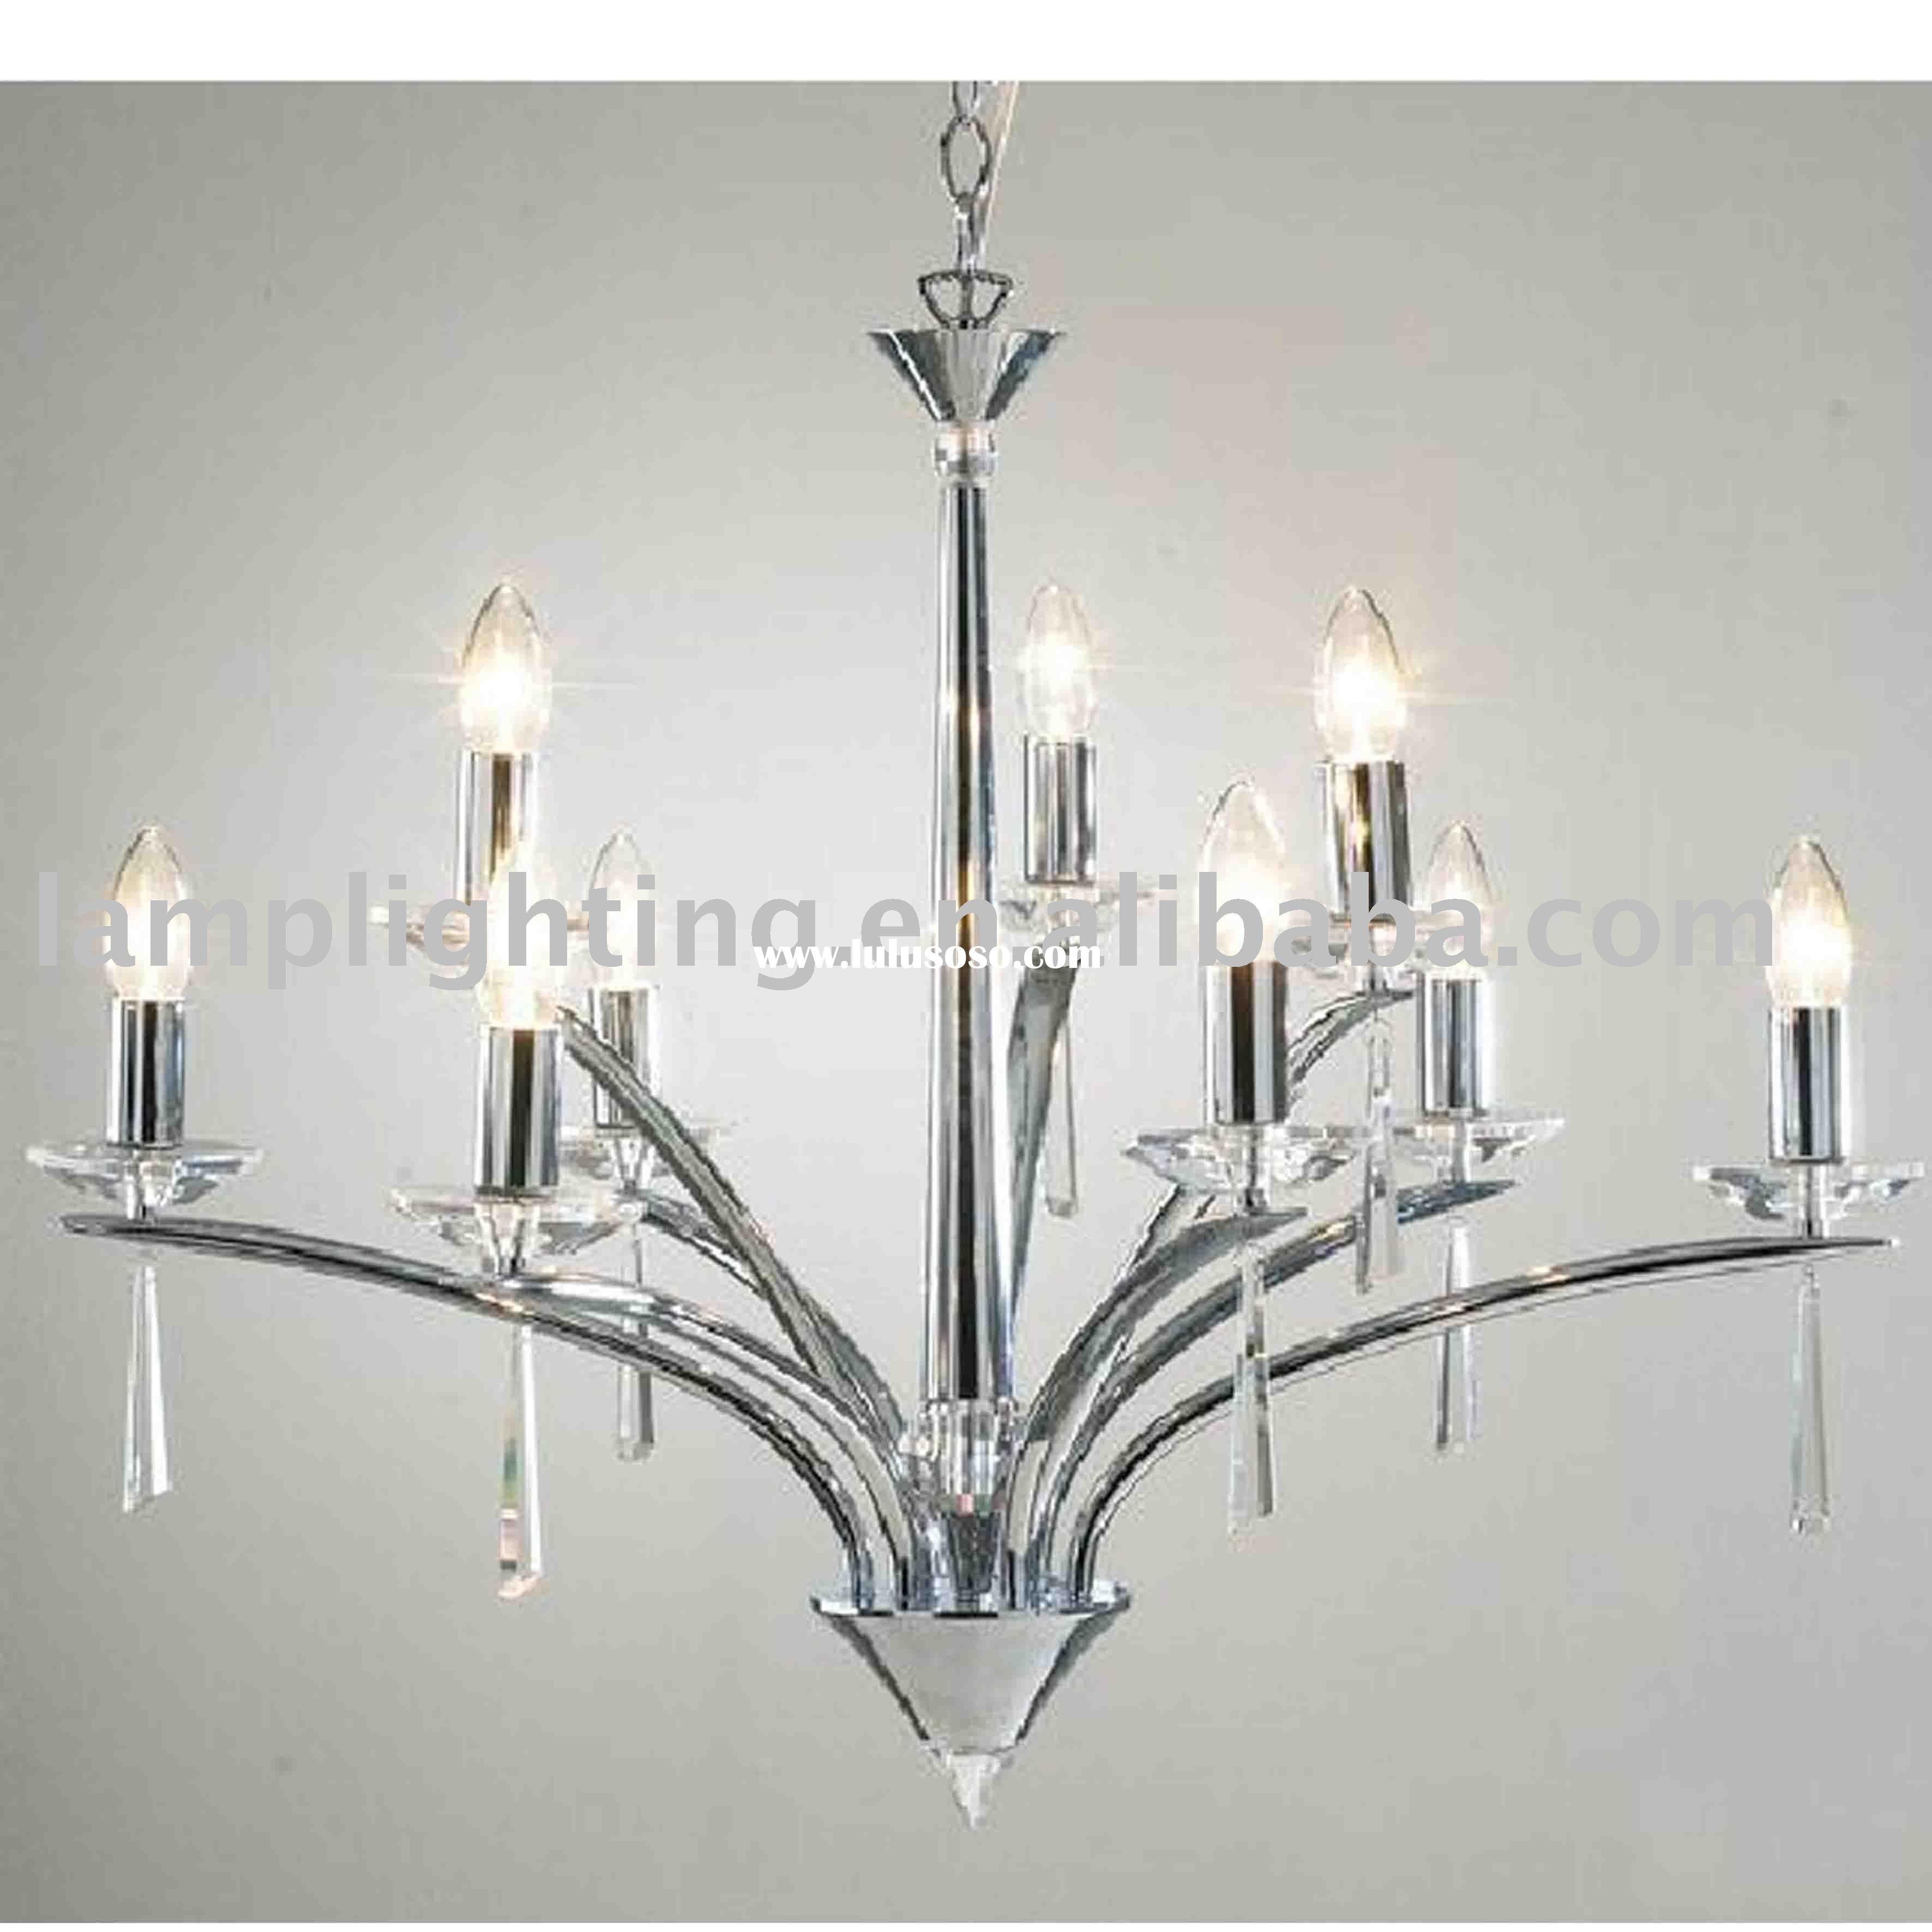 Contemporary Chandelier Led Modern Chandelier To Worldwide Within Contemporary Modern Chandeliers (View 14 of 15)